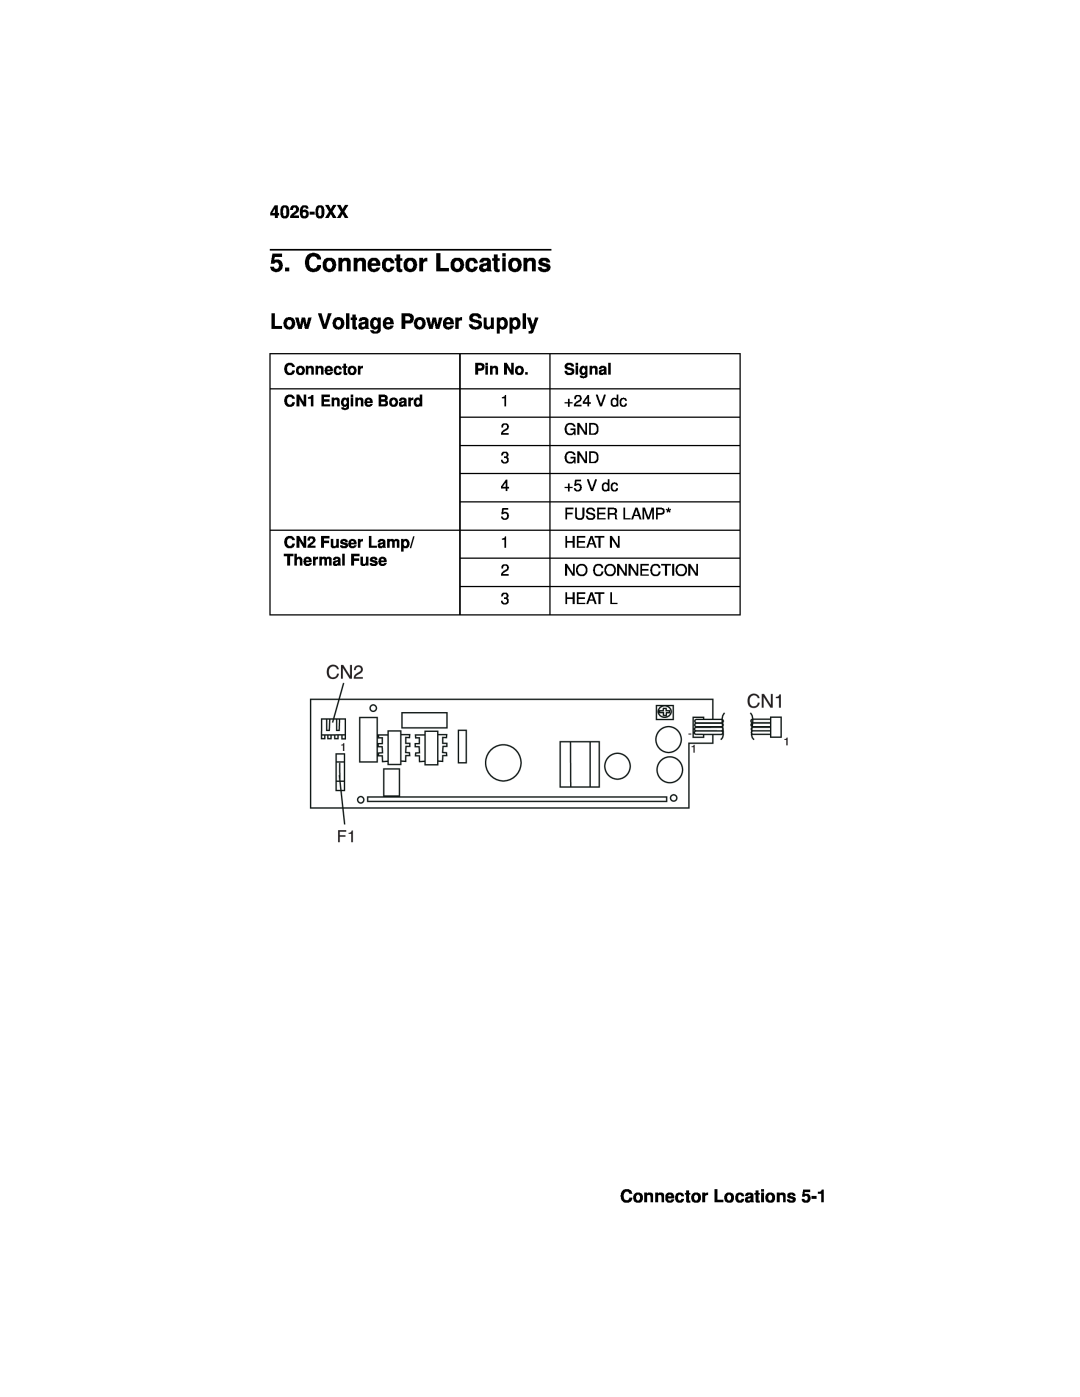 Lexmark 4026-0XX manual Connector Locations, Low Voltage Power Supply 